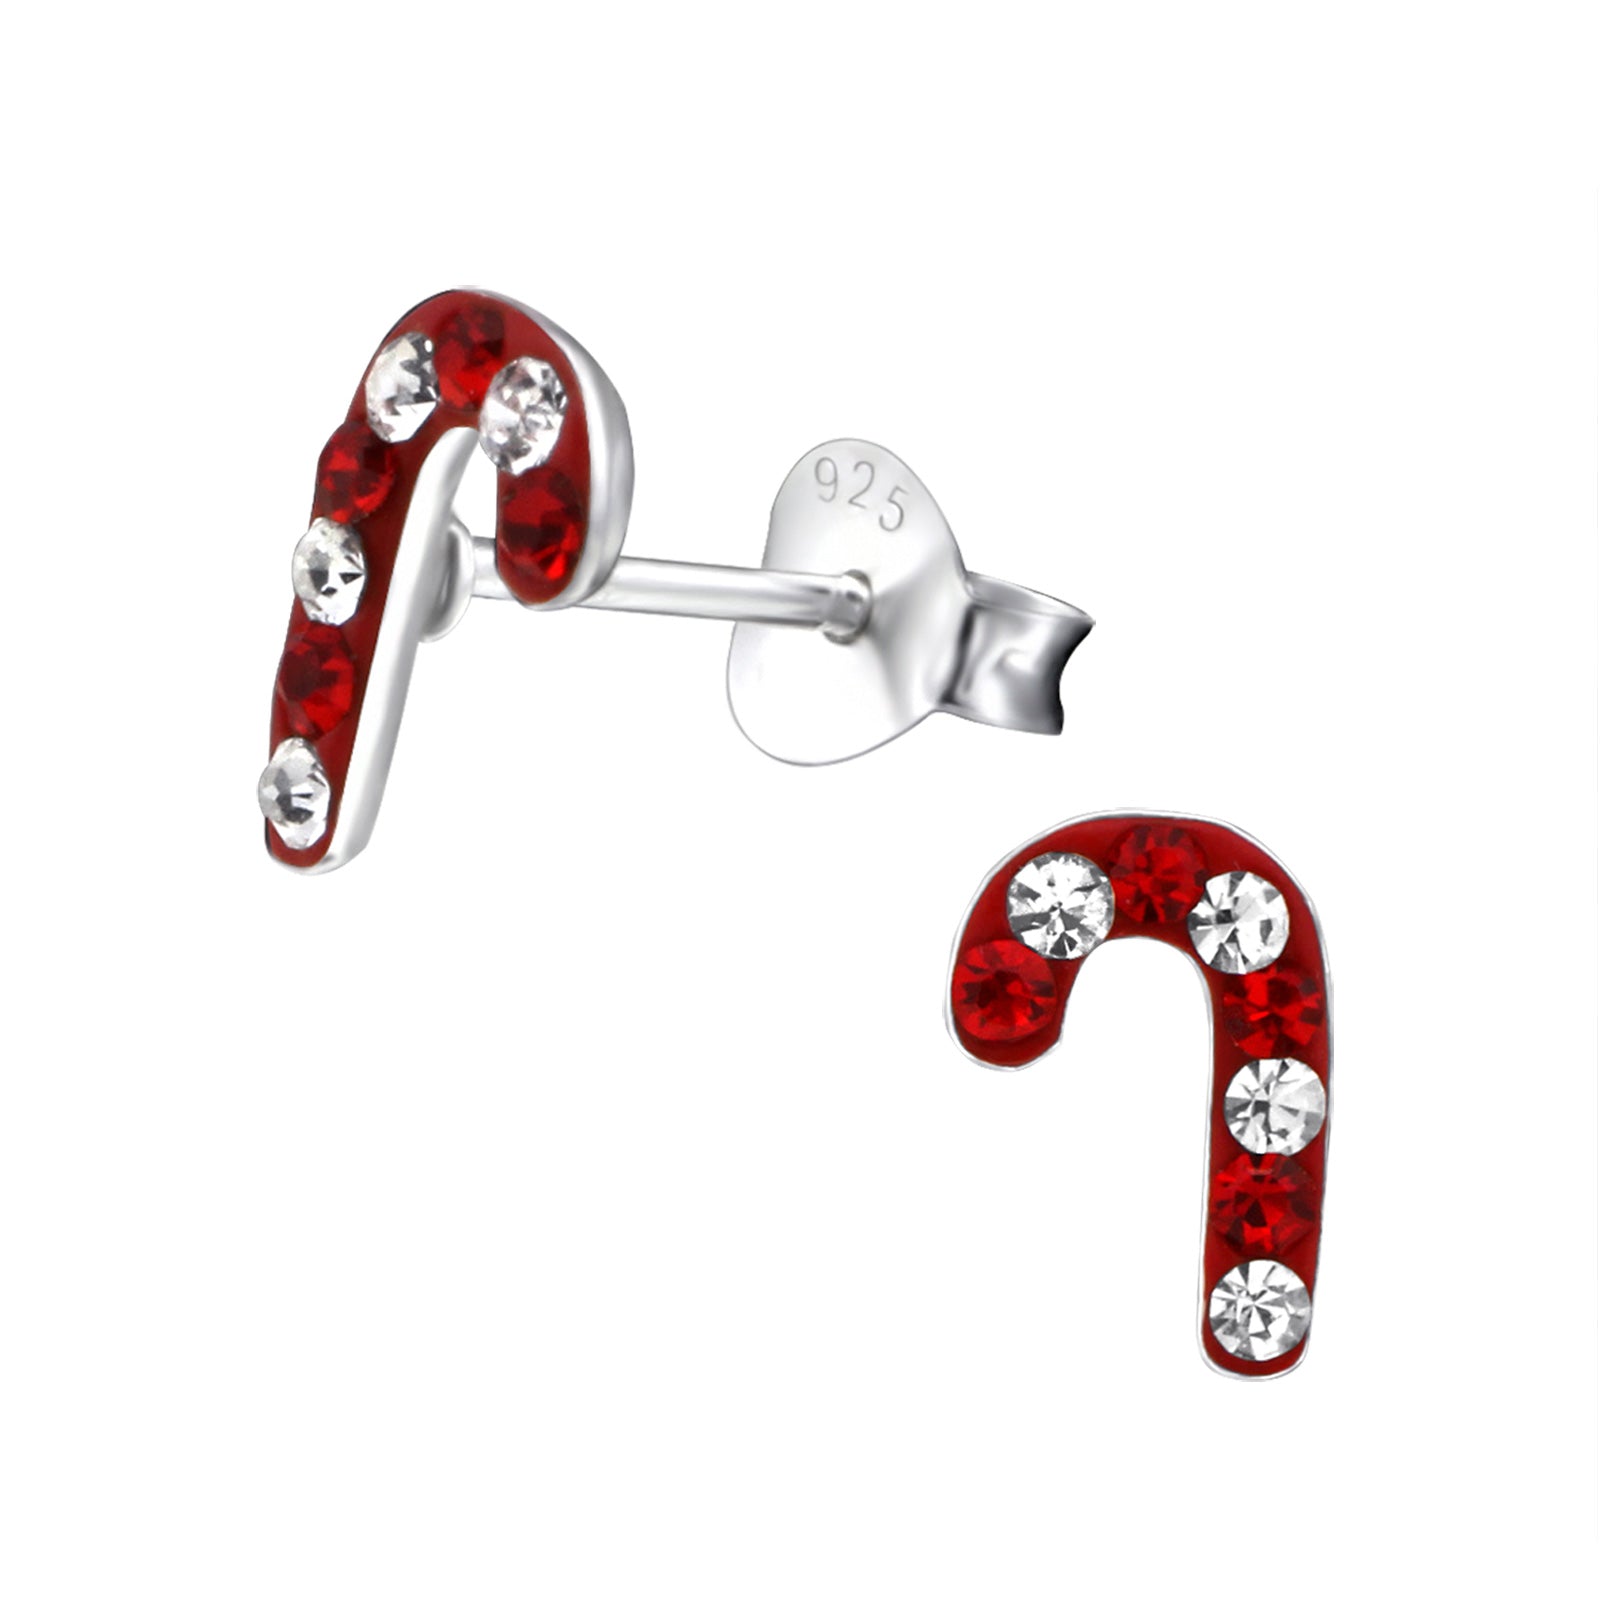 Candy cane with red and clear crystals earrings